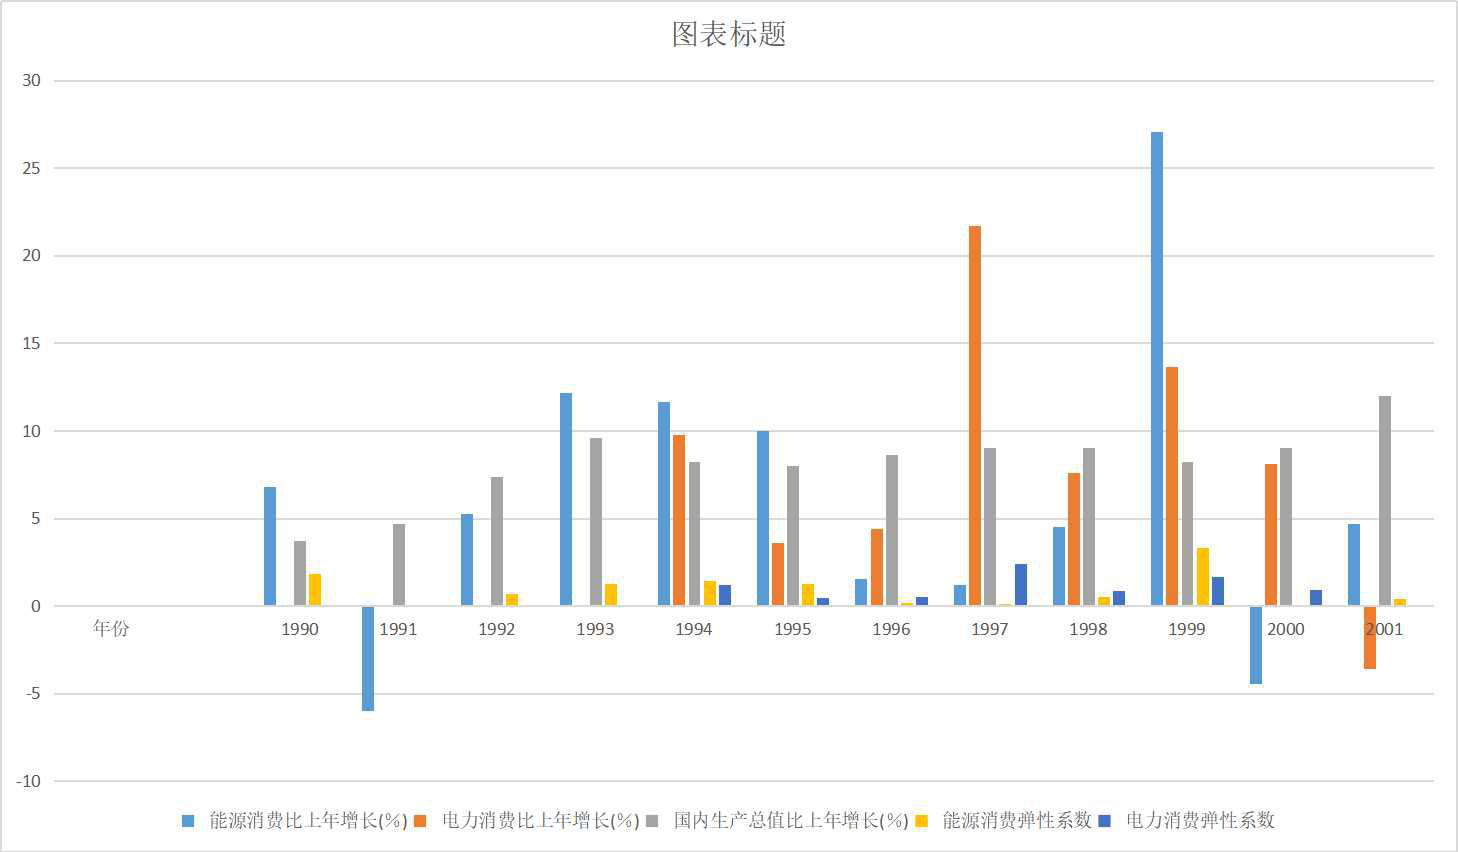 Elasticity coefficient of energy production in Qinghai Province (1990-2020)